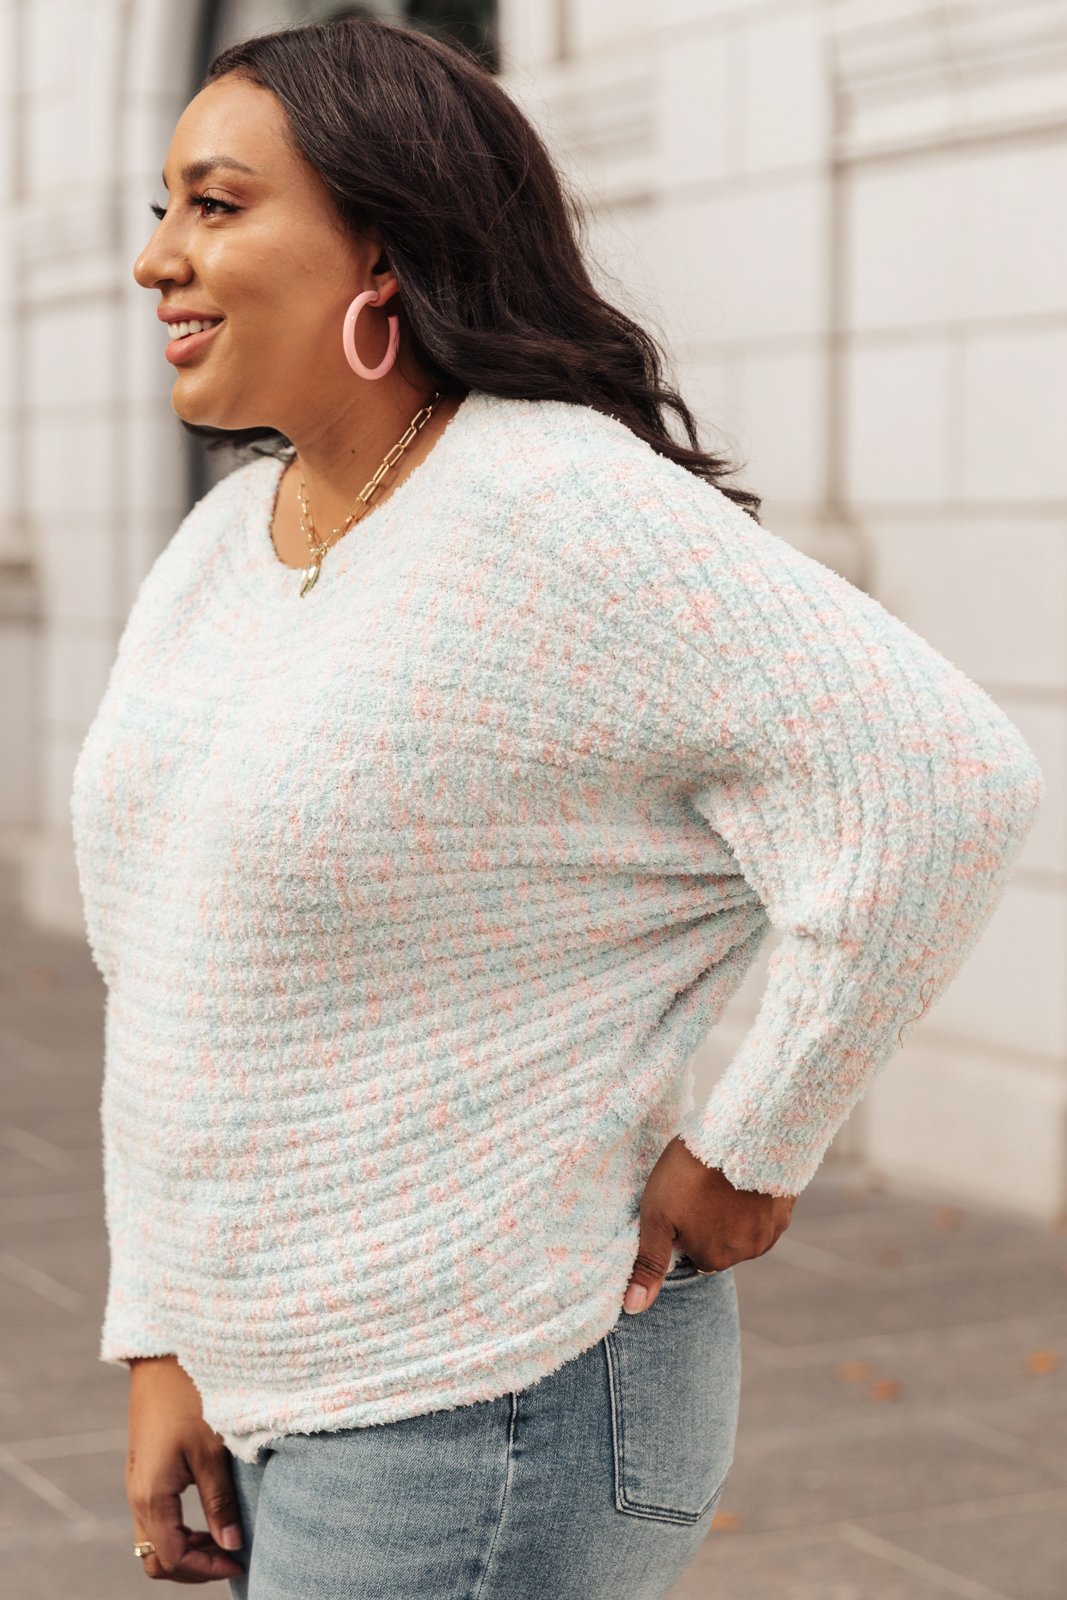 Cotton Candy Dream Sweater in Pink/Blue